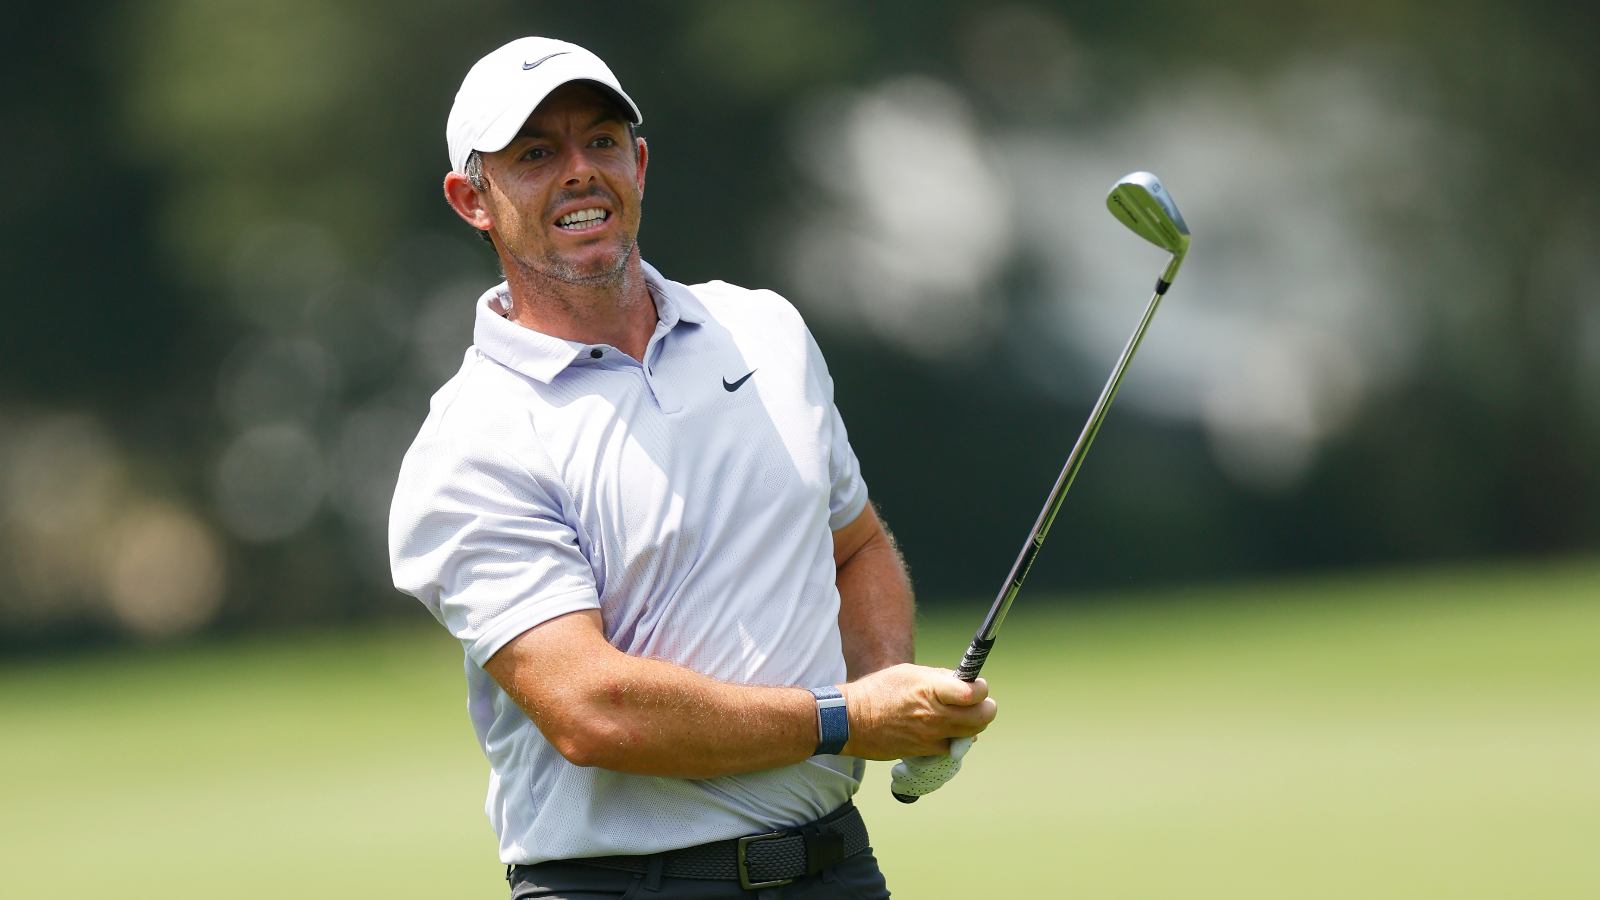 Minor Back Injury Could Cost Rory McIlroy Nearly $18 Million